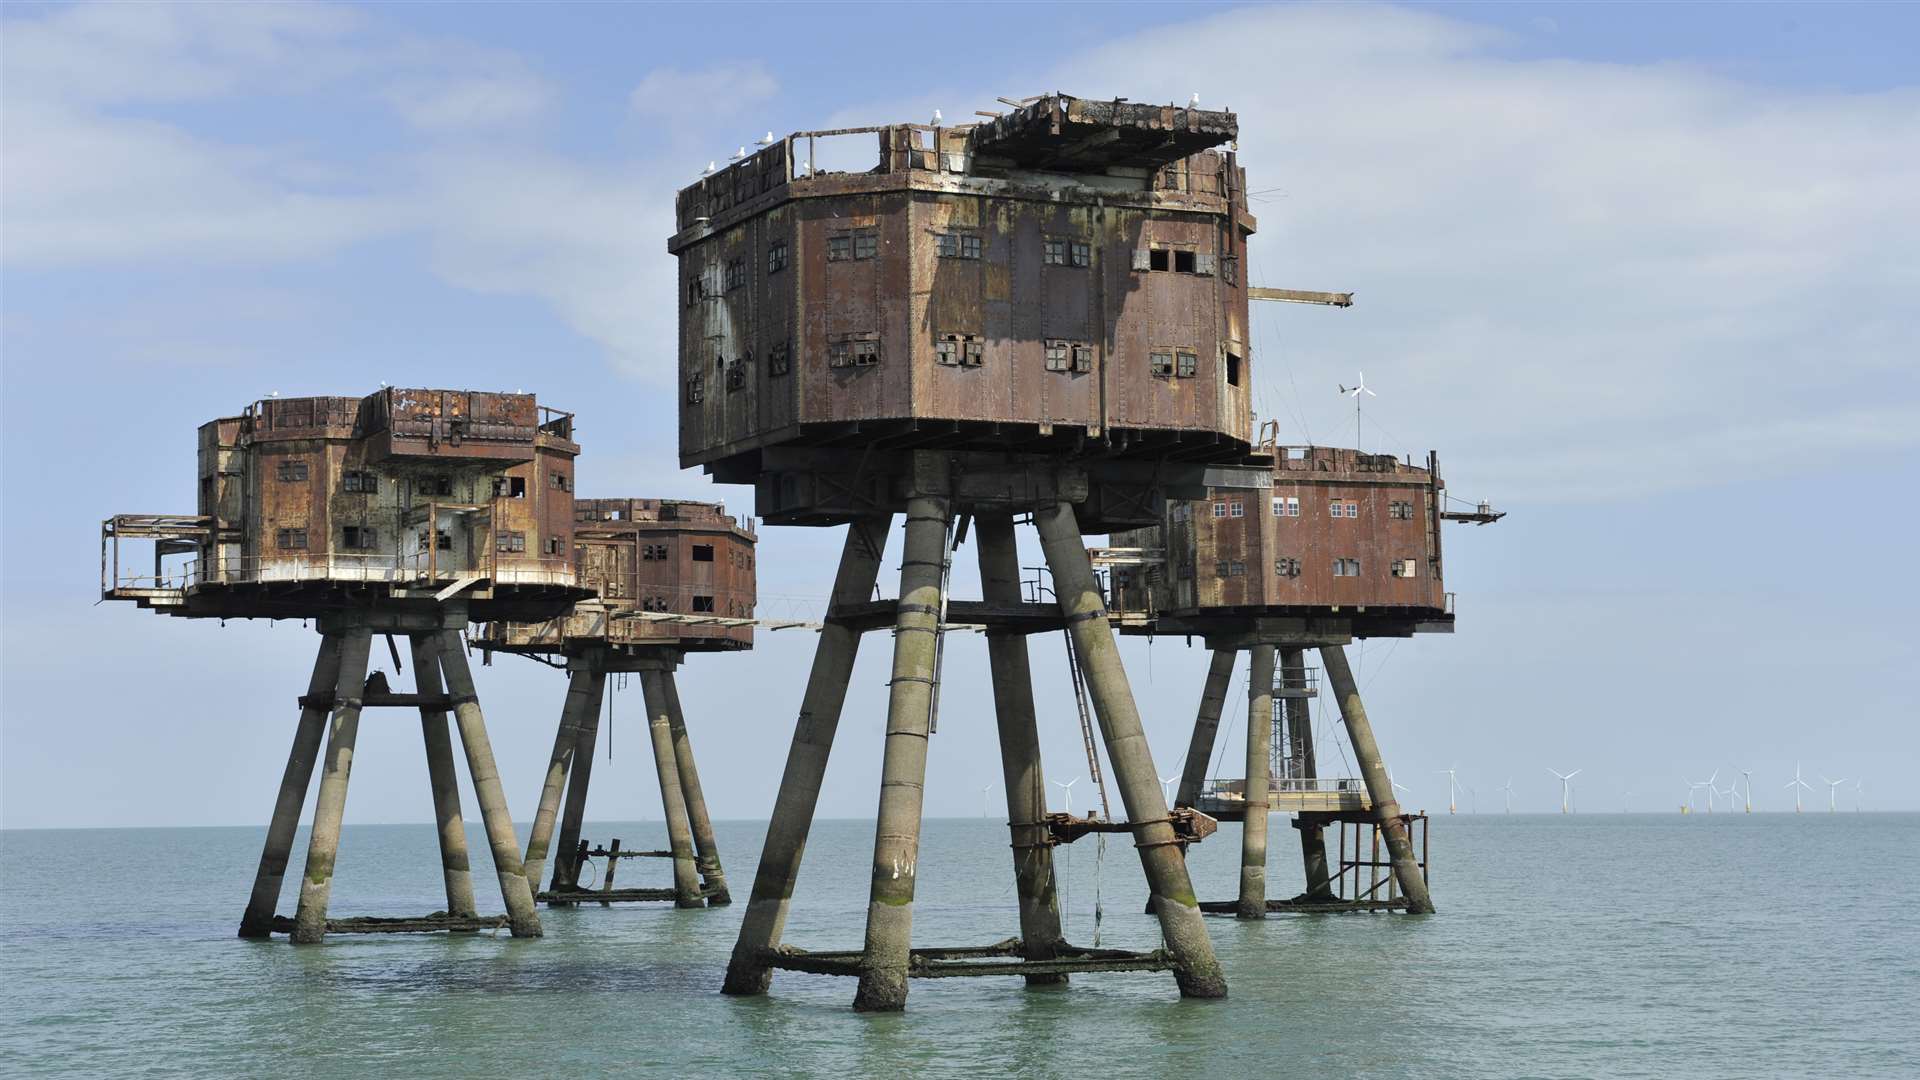 Red Sands sea forts off the coast of North Kent